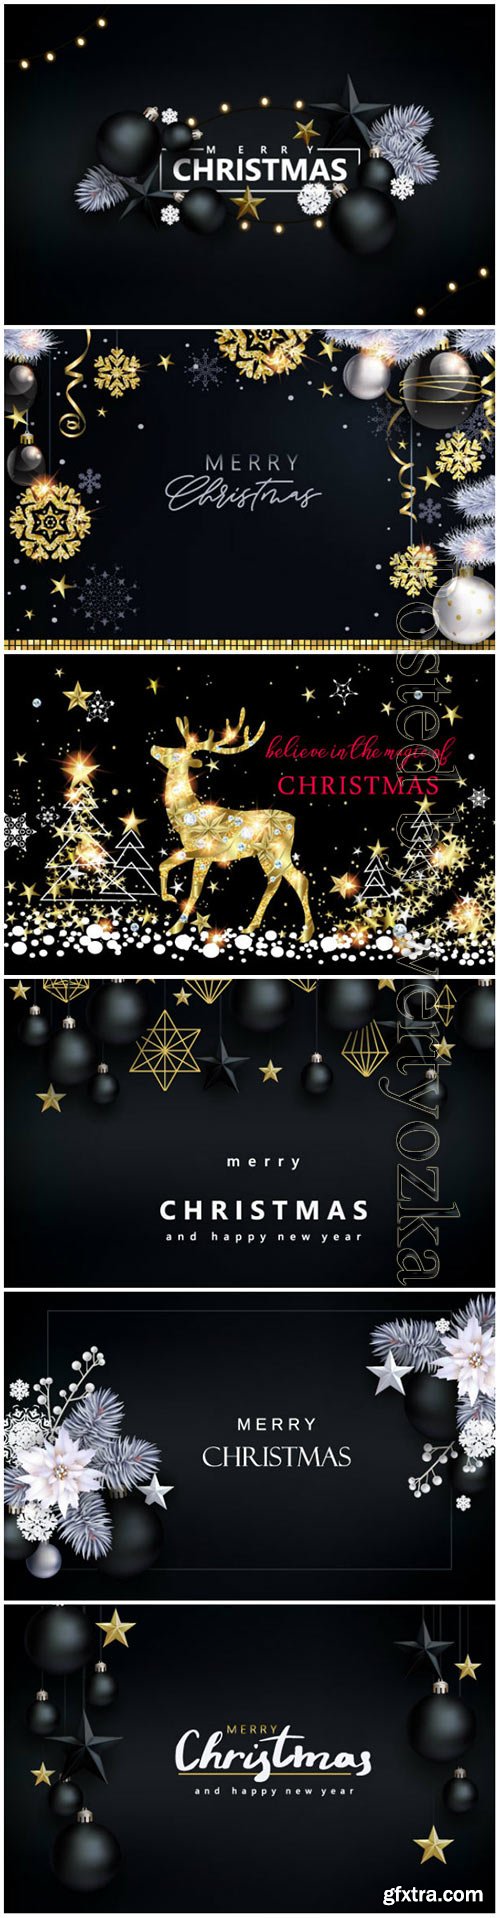 Christmas with black and white balls vector illustration